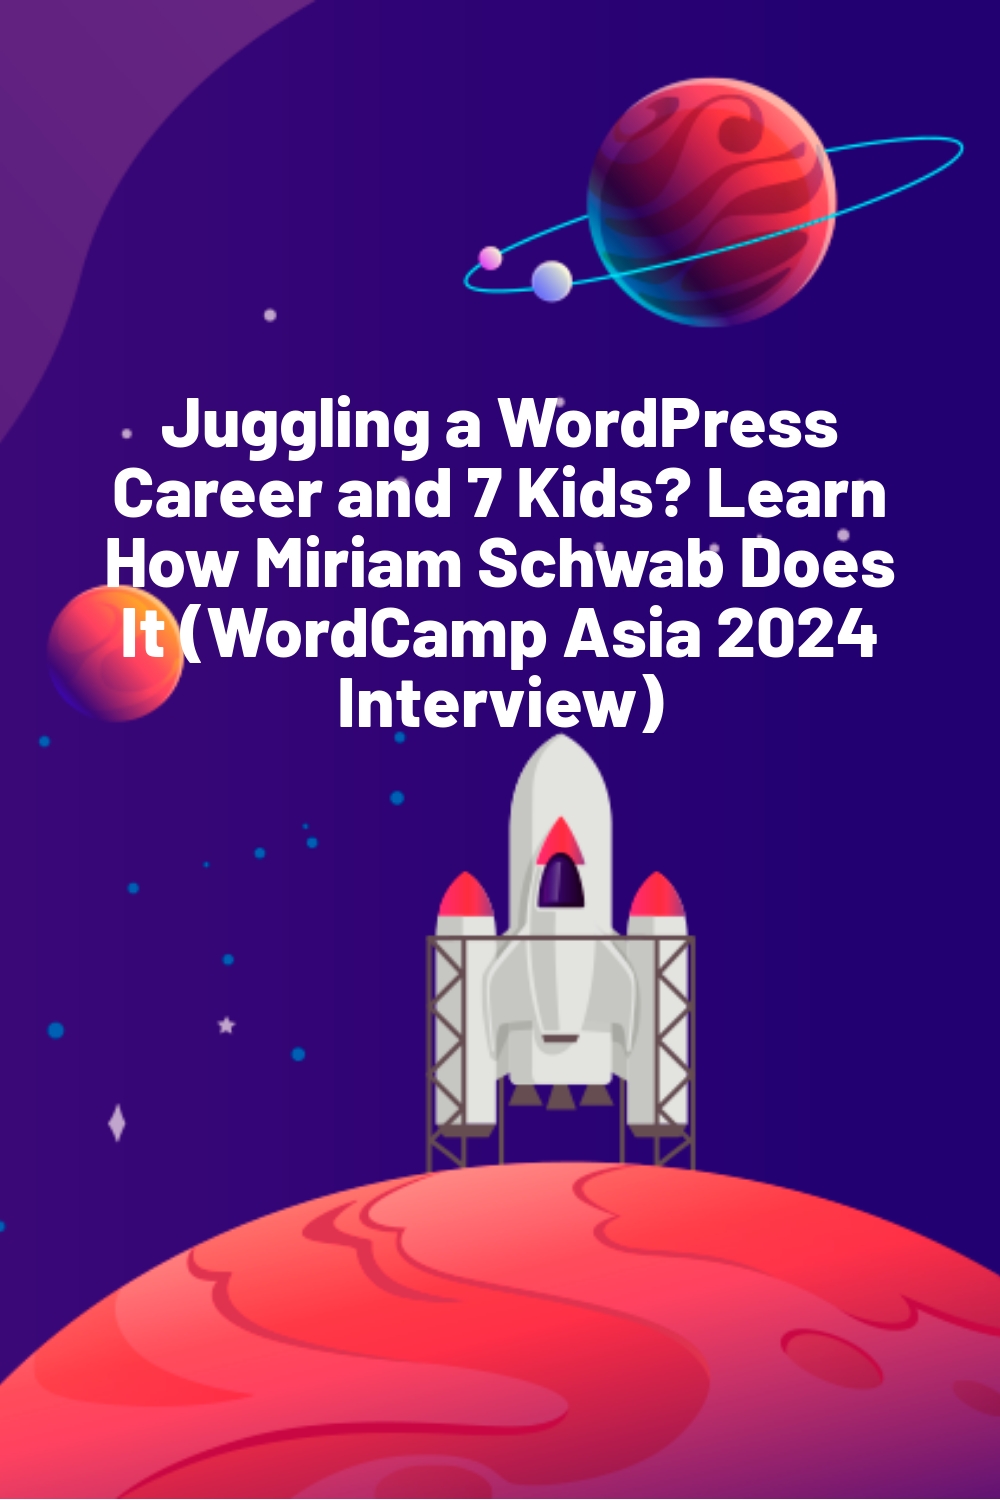 Juggling a WordPress Career and 7 Kids? Learn How Miriam Schwab Does It (WordCamp Asia 2024 Interview)